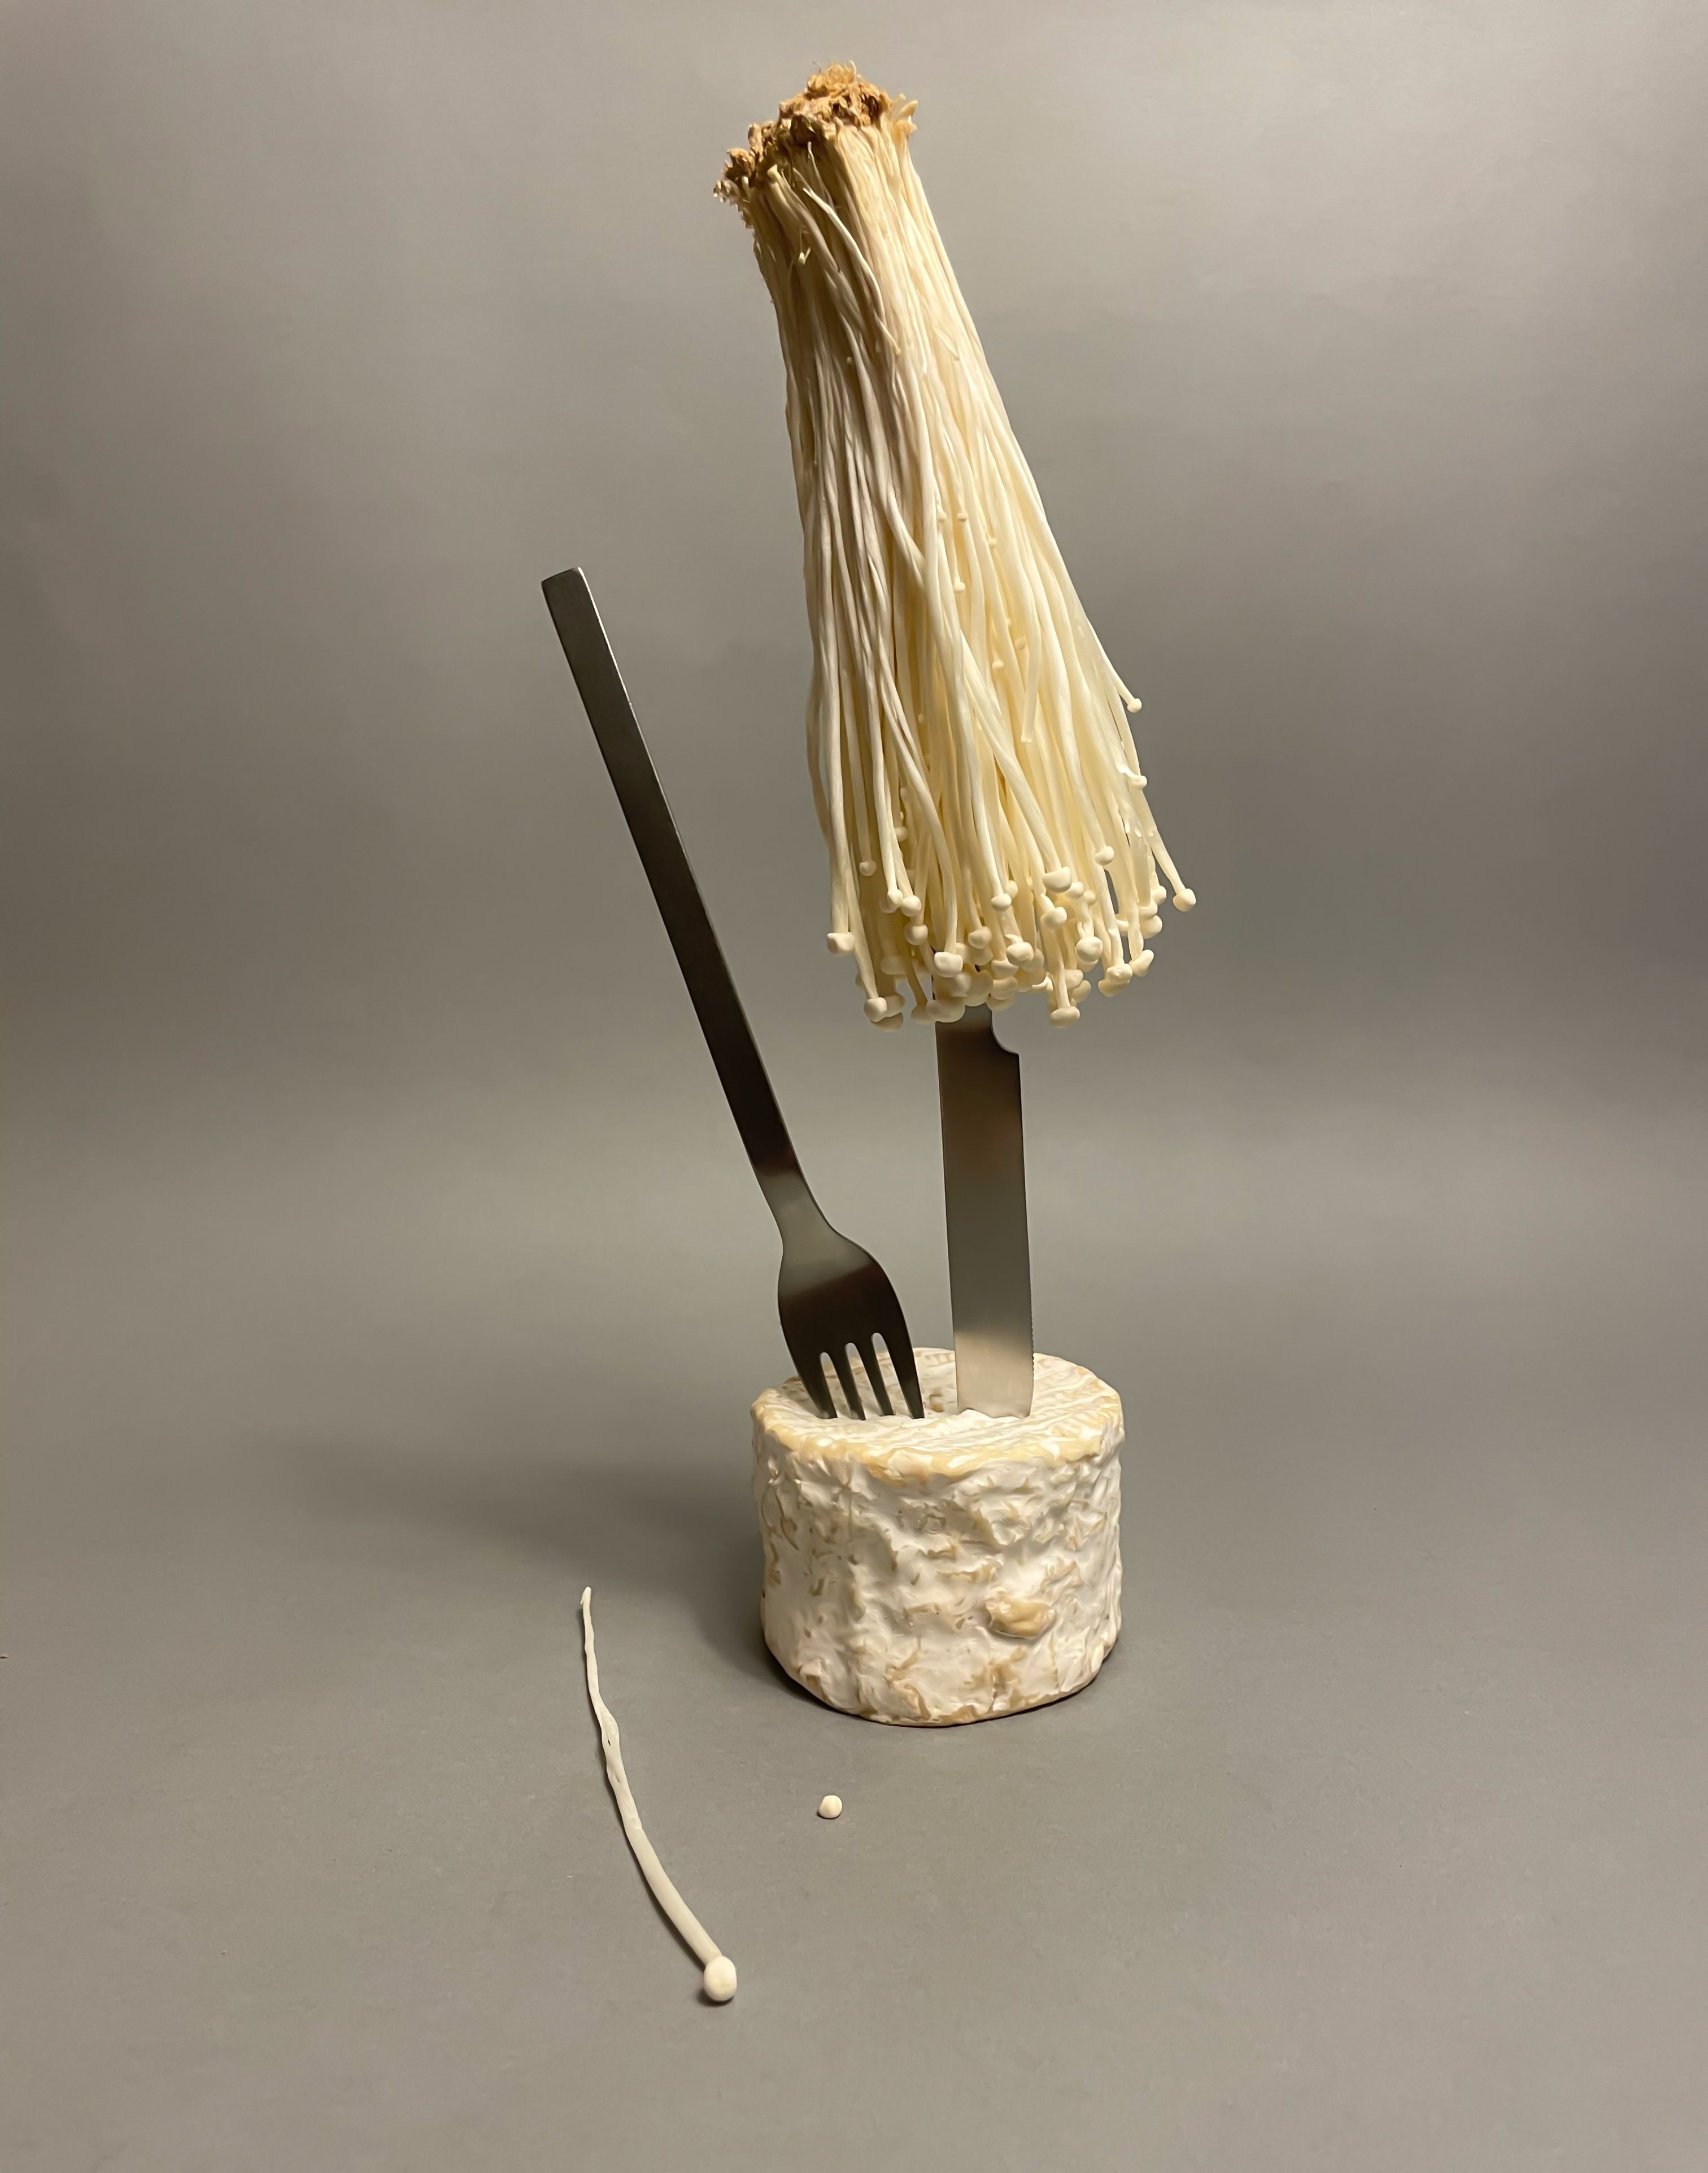 Arrangement of a fork and knife with an enoki mushroom and goat cheese